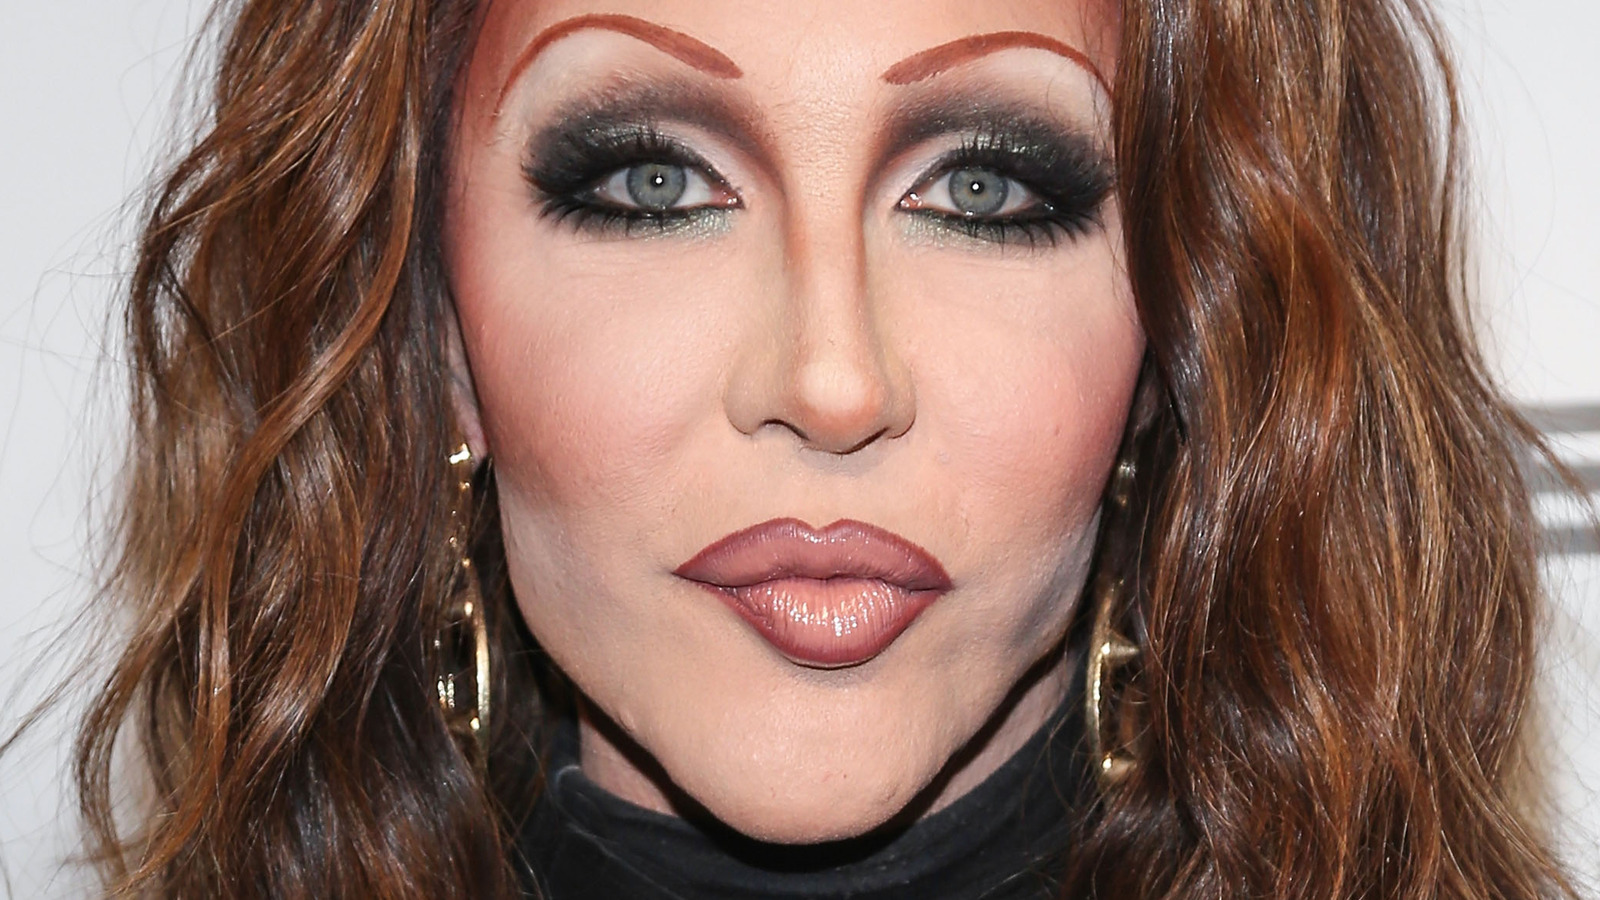 What Happened To Chad Michaels After RuPaul’s Drag Race?